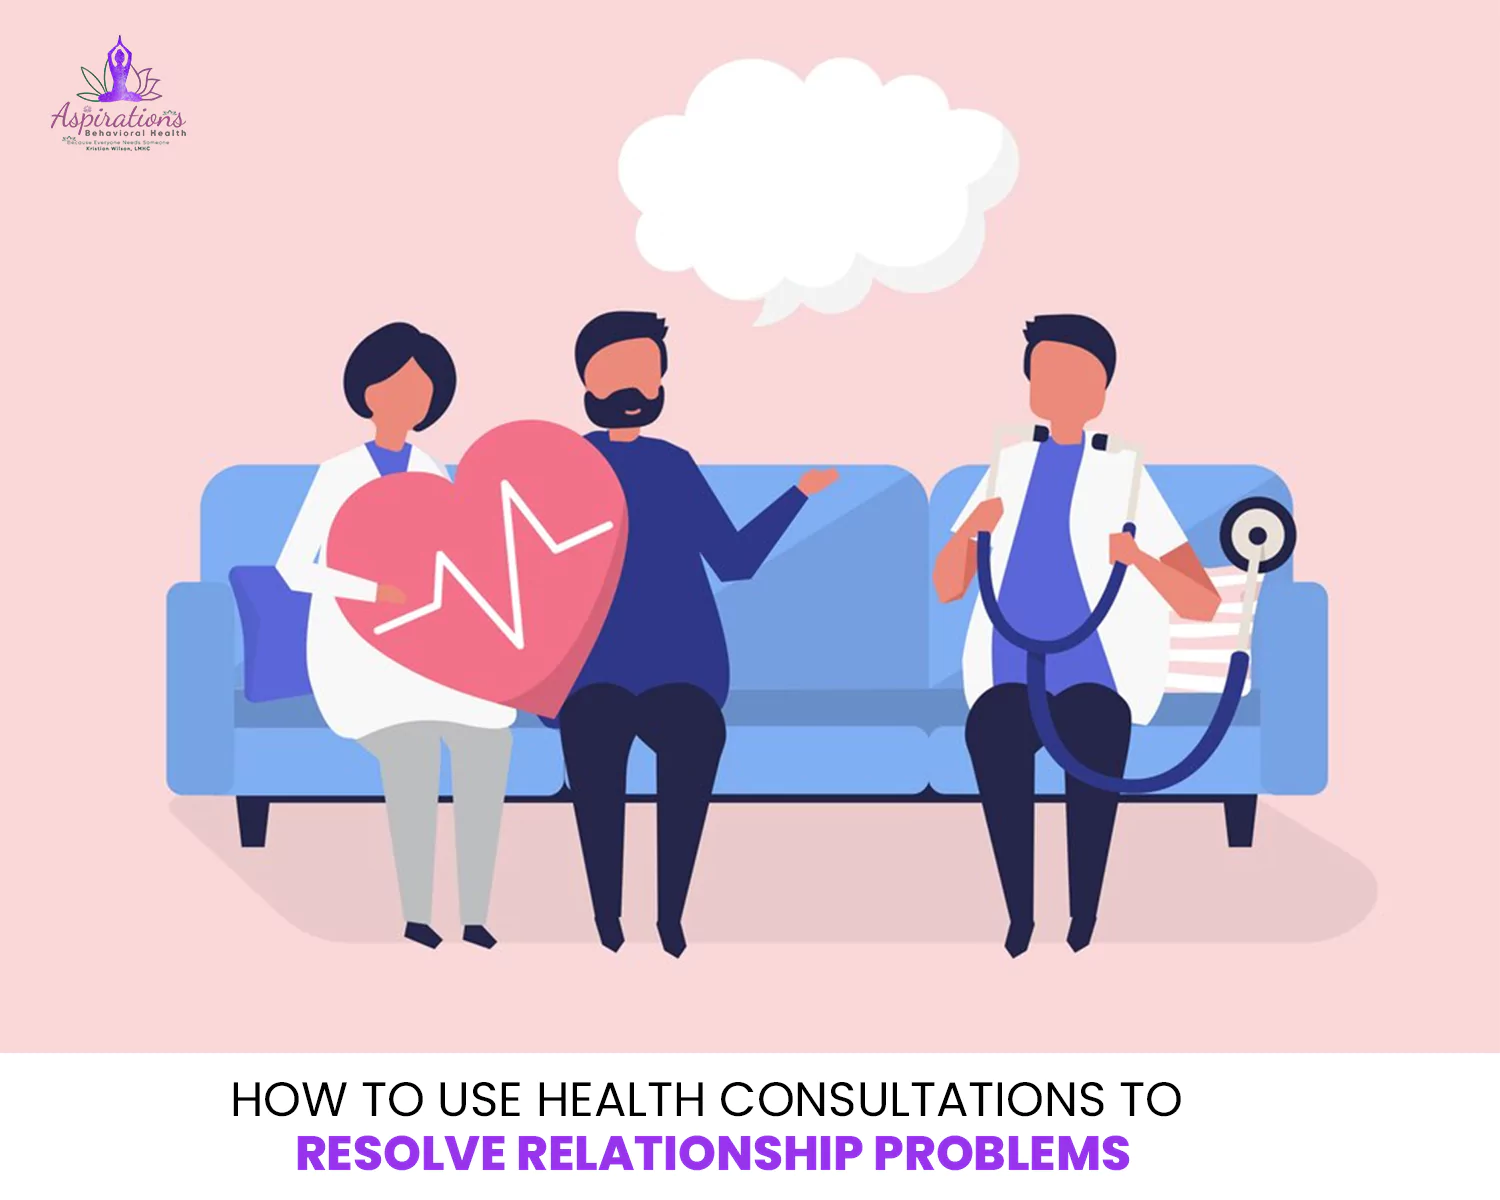 How to use health consultations to resolve relationship problems